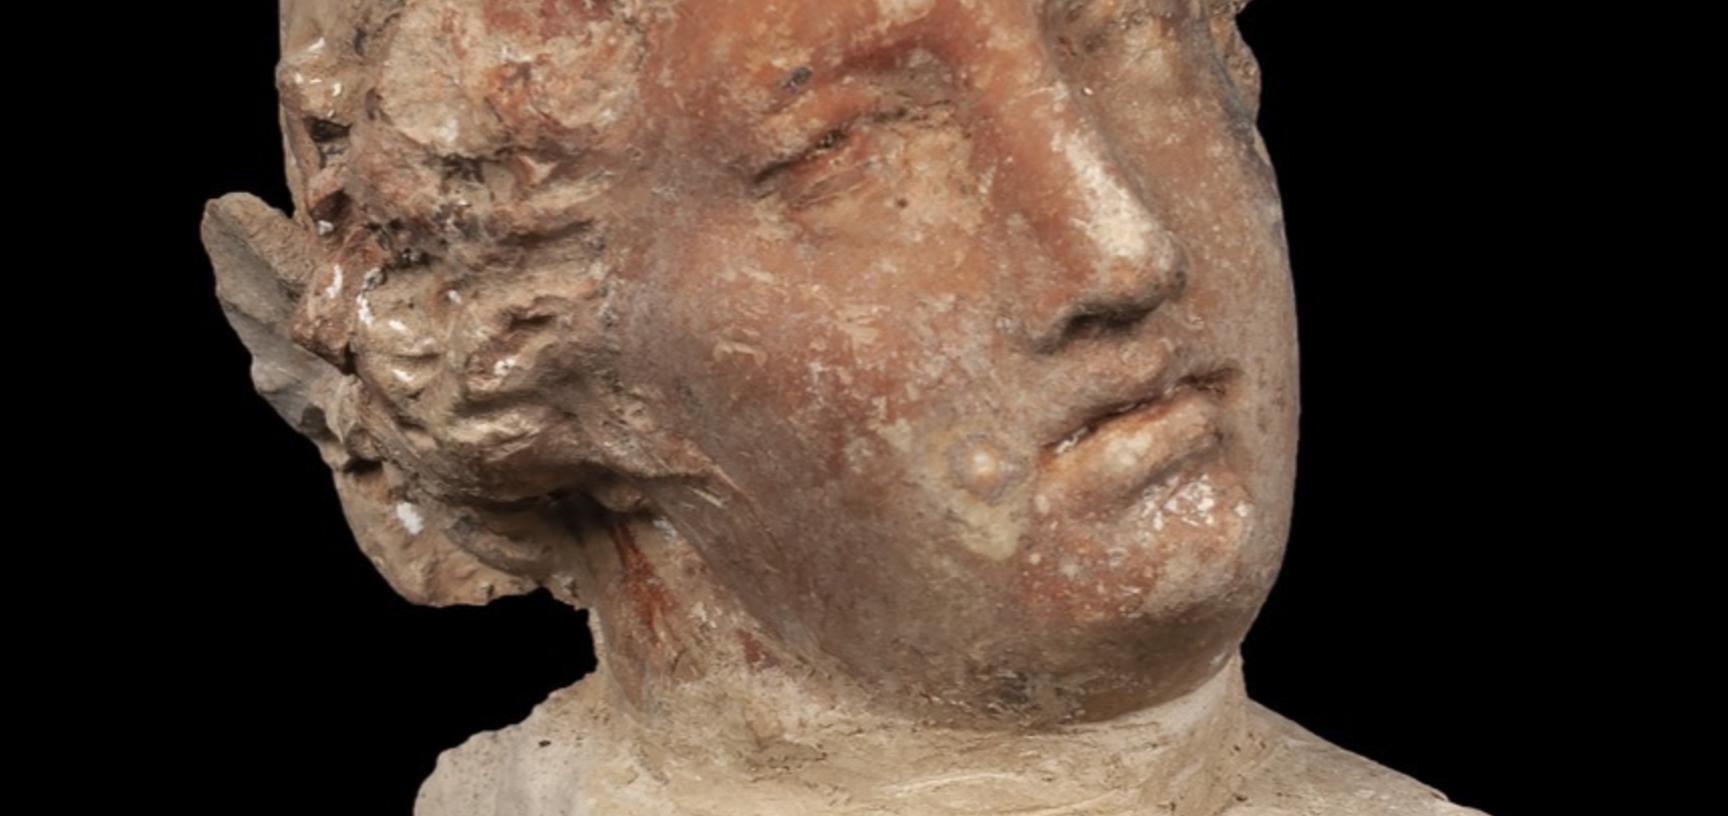 Very small statue of a head with Grecian-style hair.